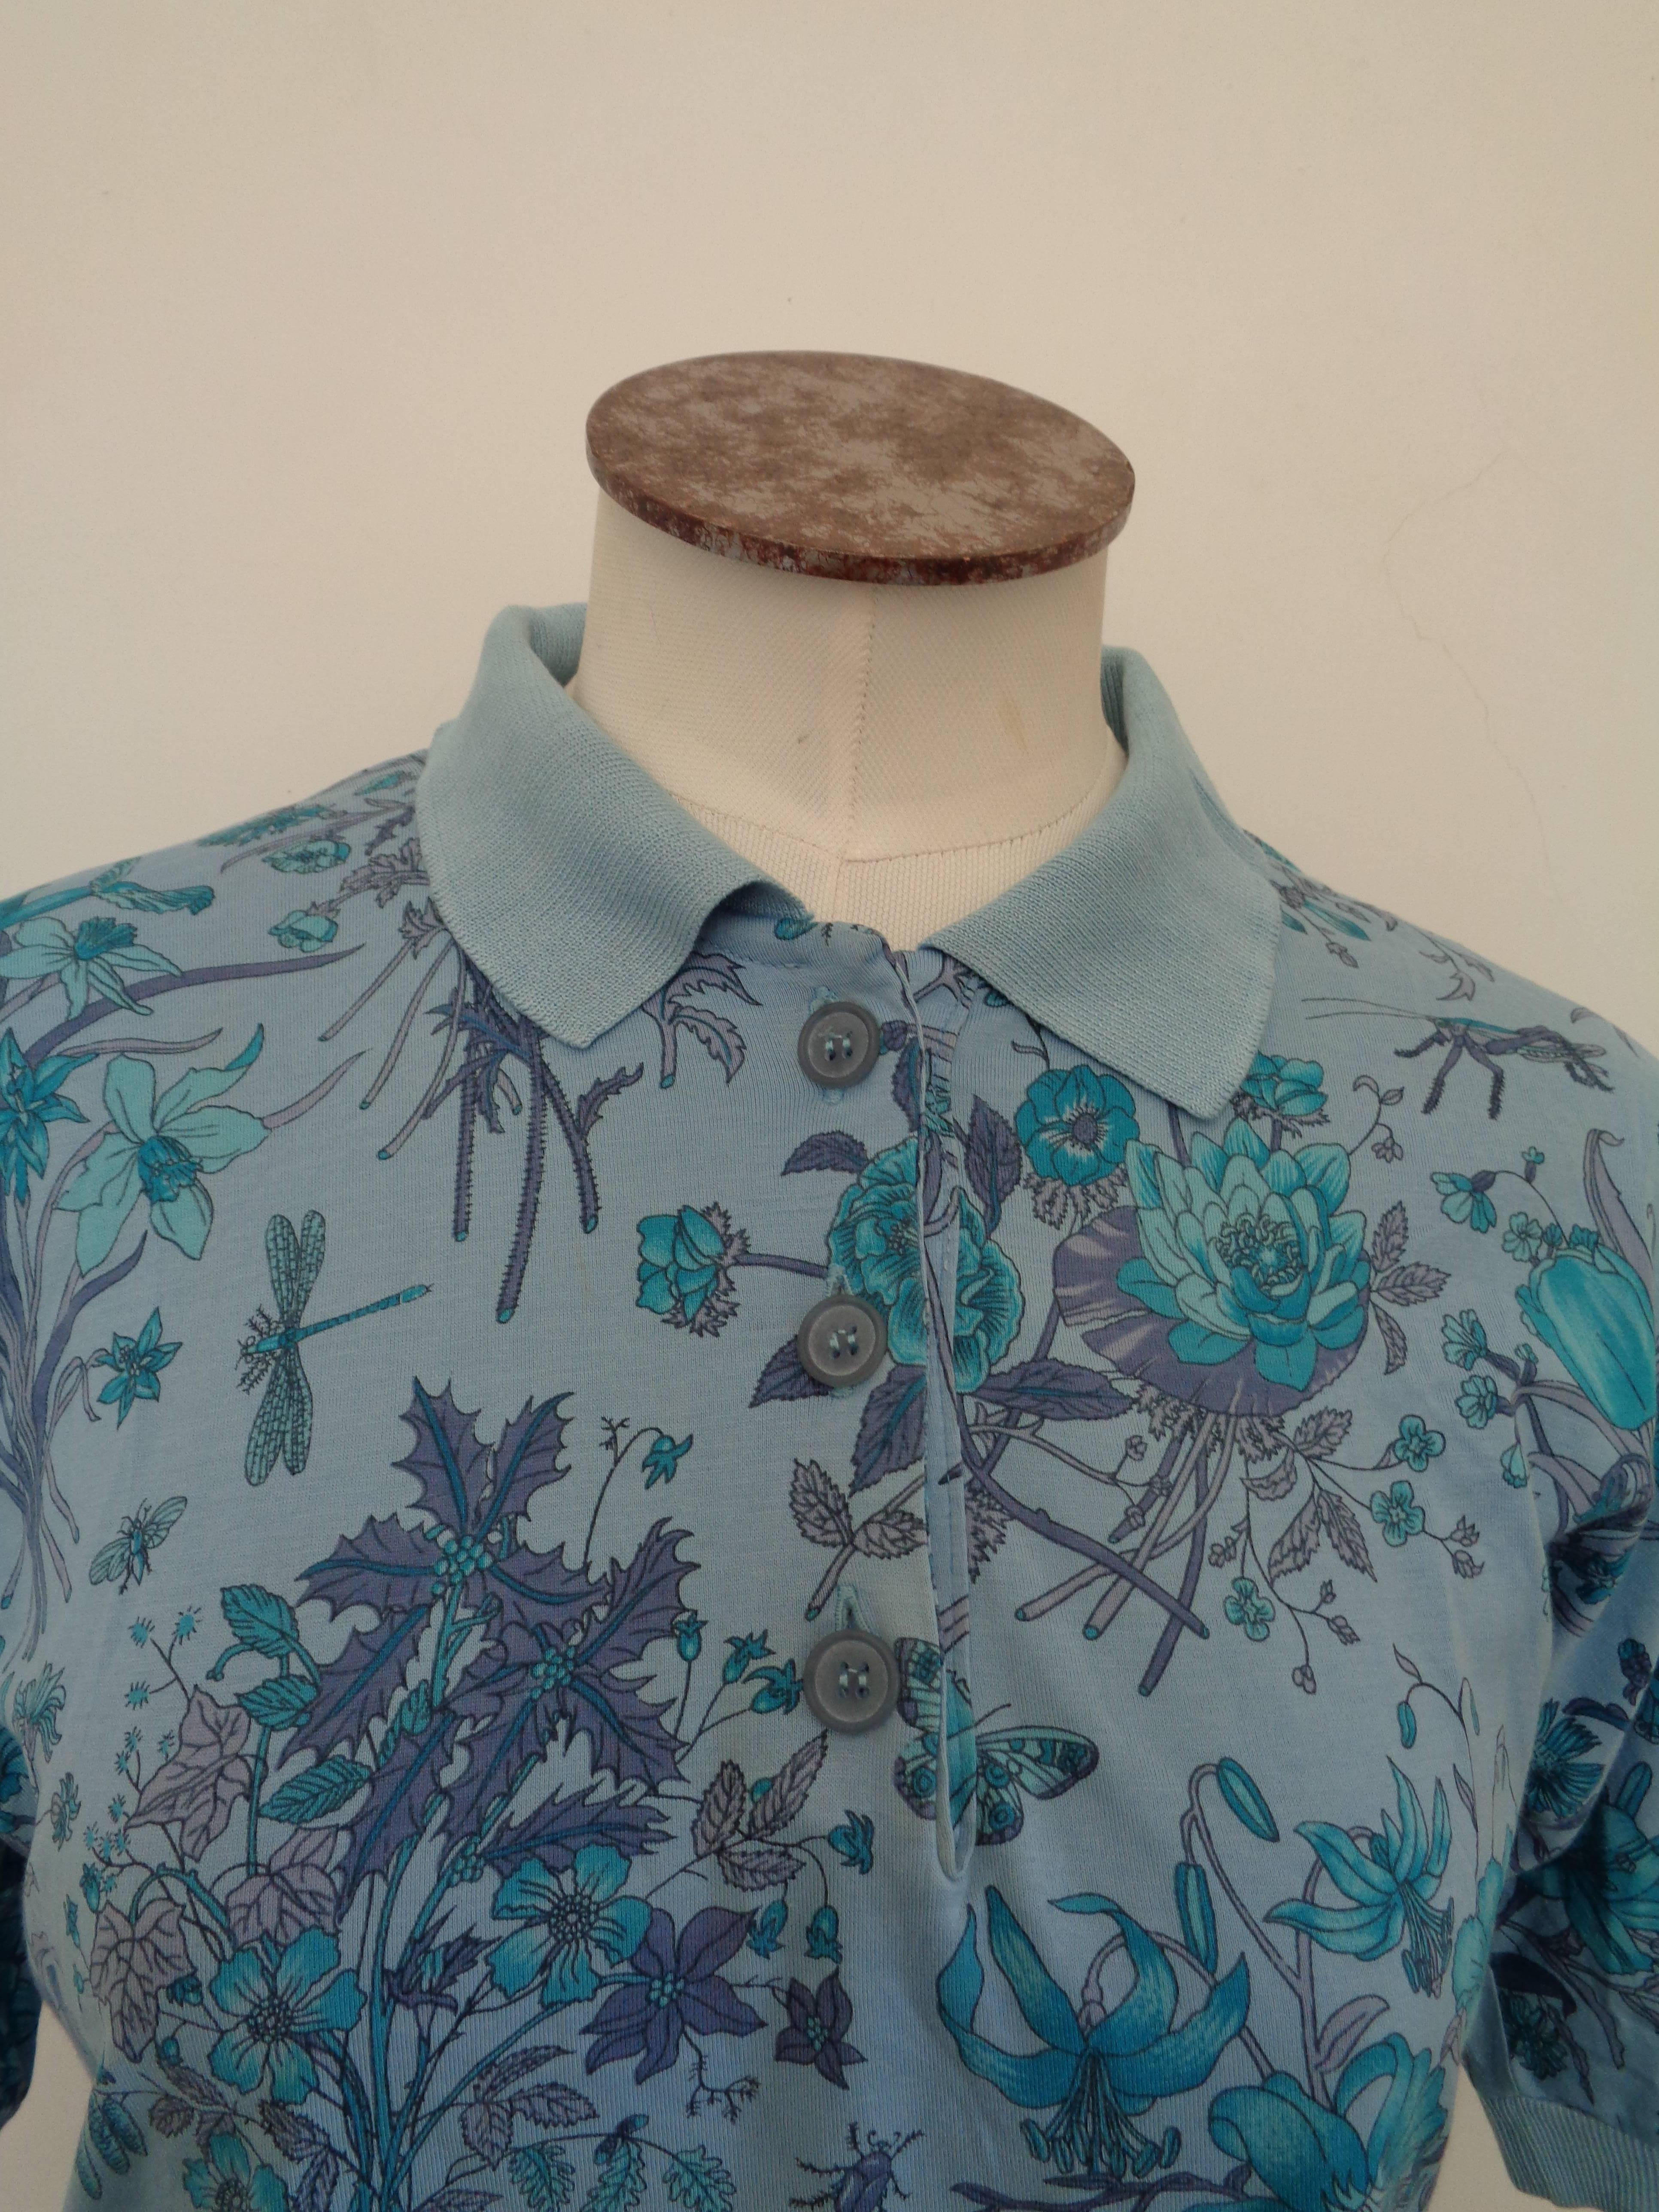 Rare Guggio Gucci blu Cotton Shirt

Totally made in italy in size S